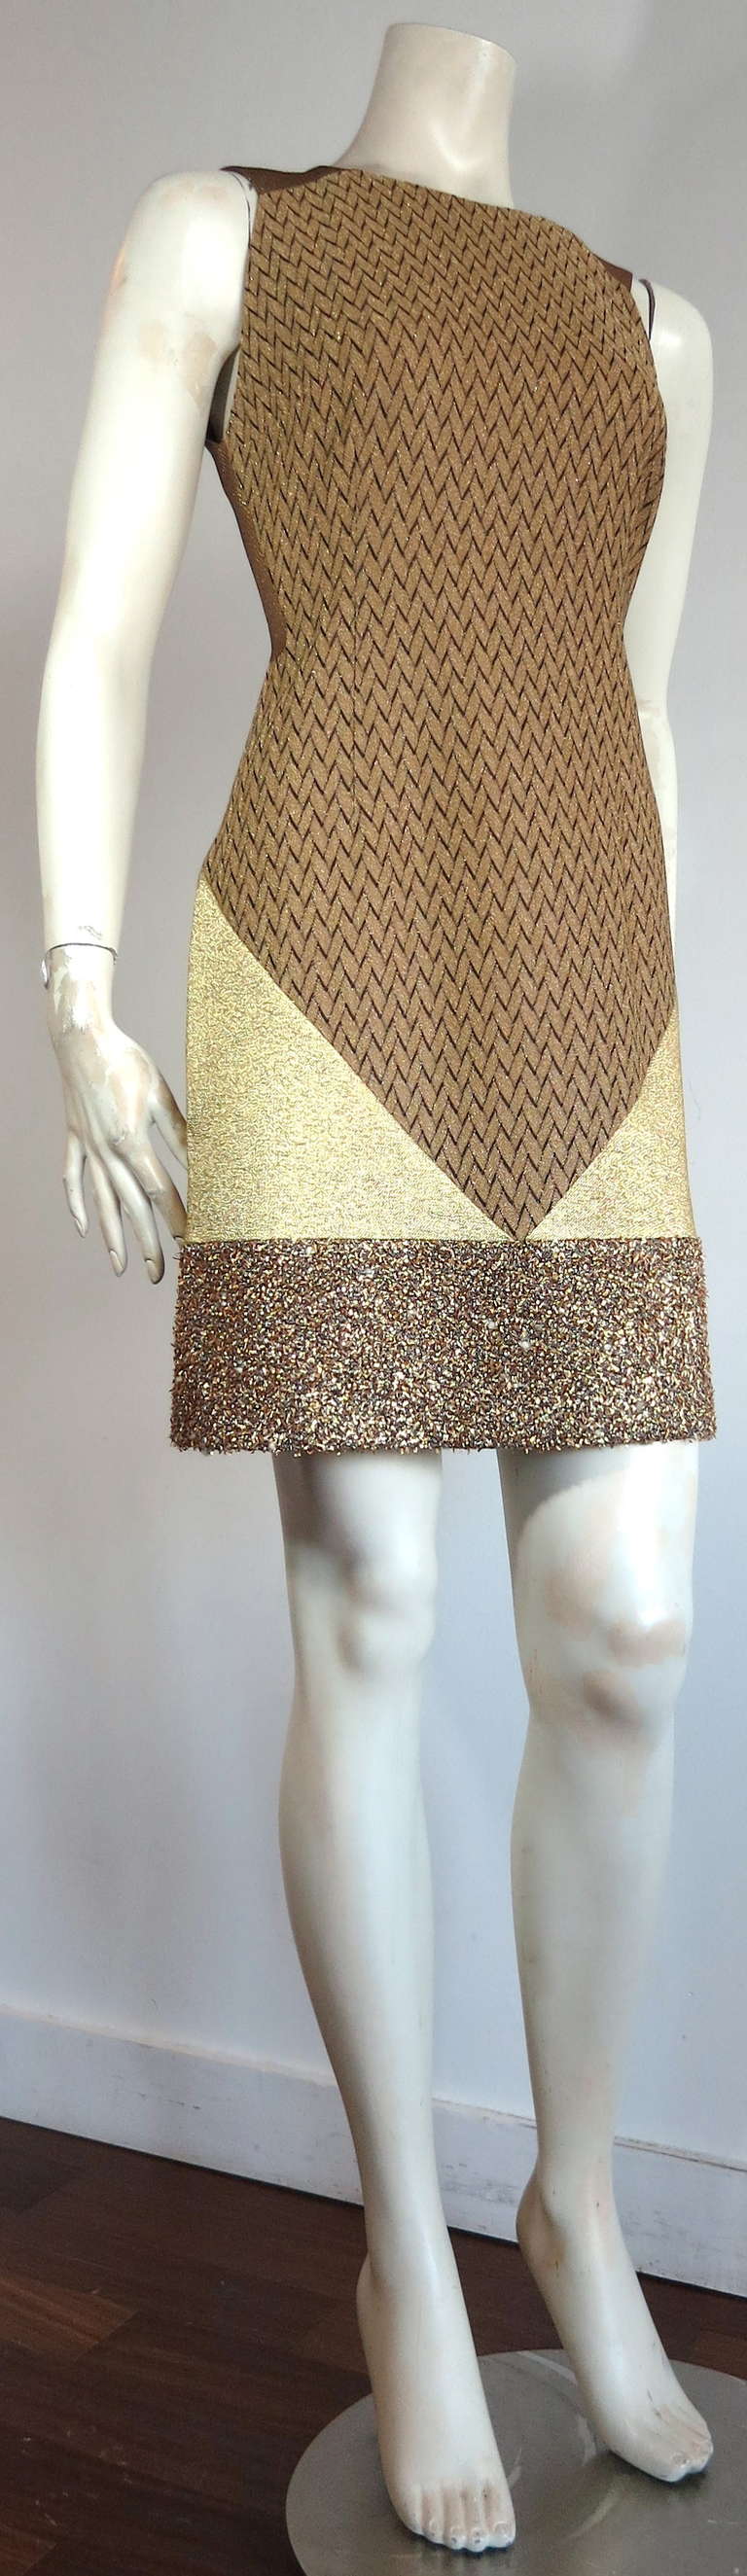 New MISSONI Metallic gold patchwork cocktail dress.

This brand new with tag dress was designed by Angela Missoni recently in Italy.

The dress features angled seaming construction utilizing four different, ultra-lux, metallic gold stretch